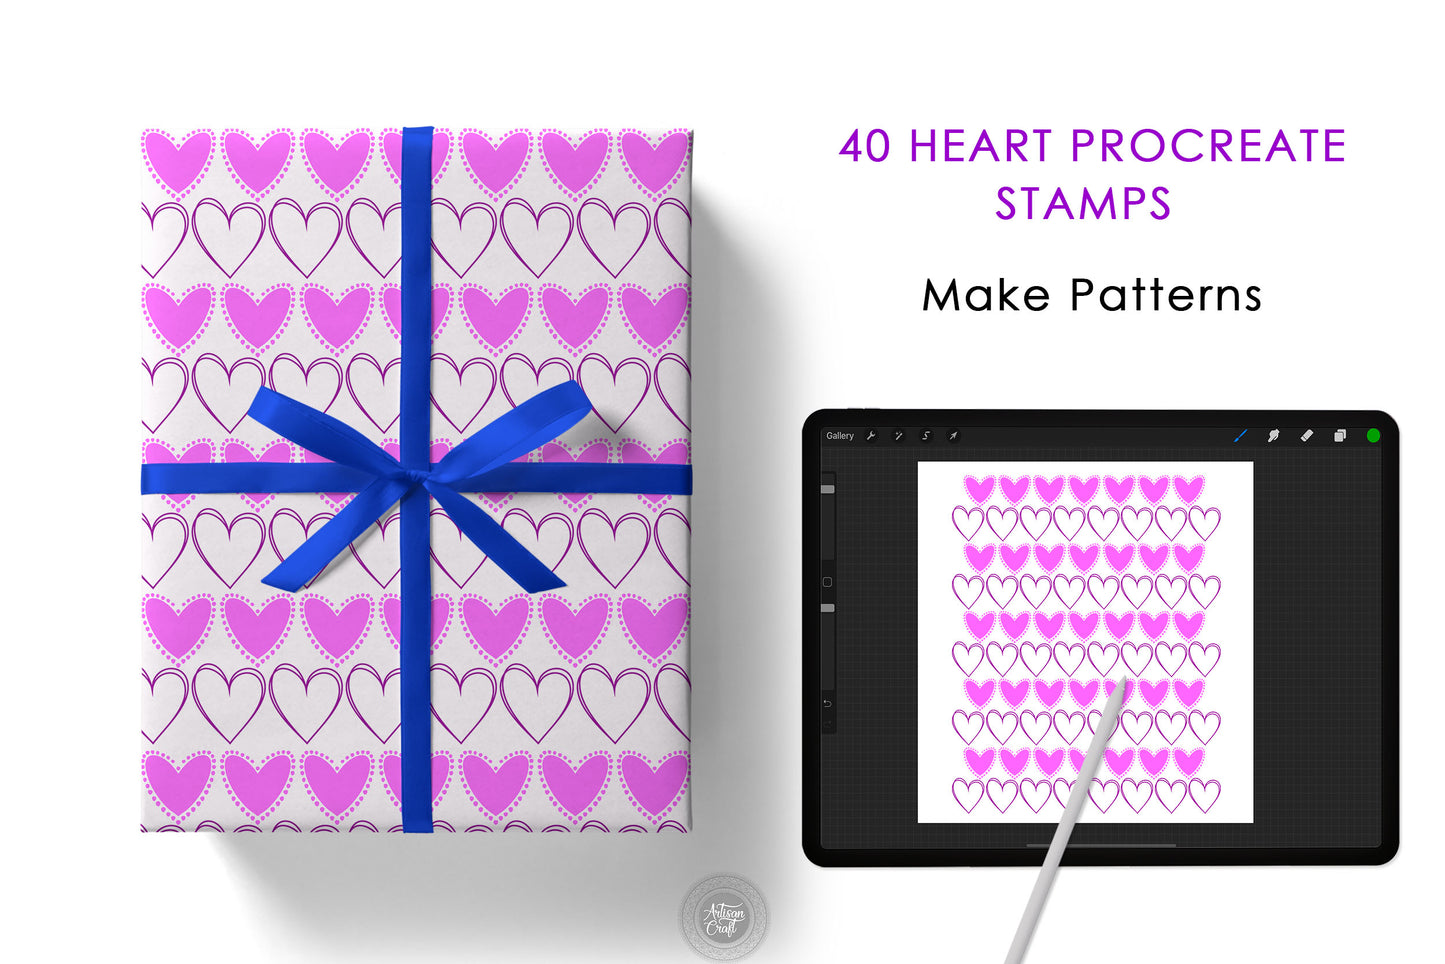 40 Procreate heart stamps